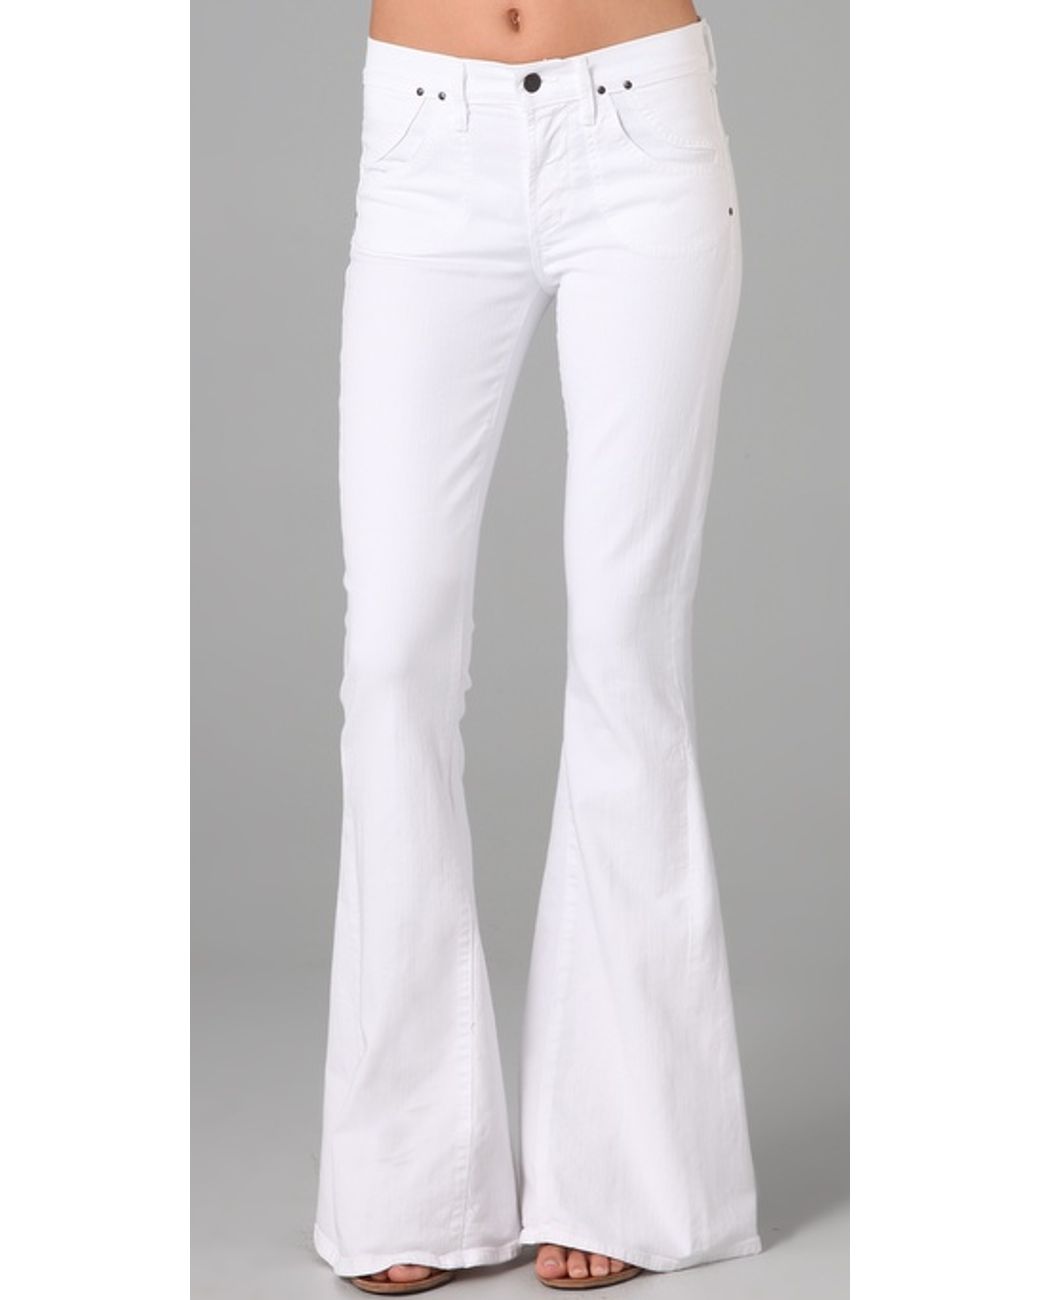 Citizens of Humanity Angie Super Flare Jeans in White | Lyst